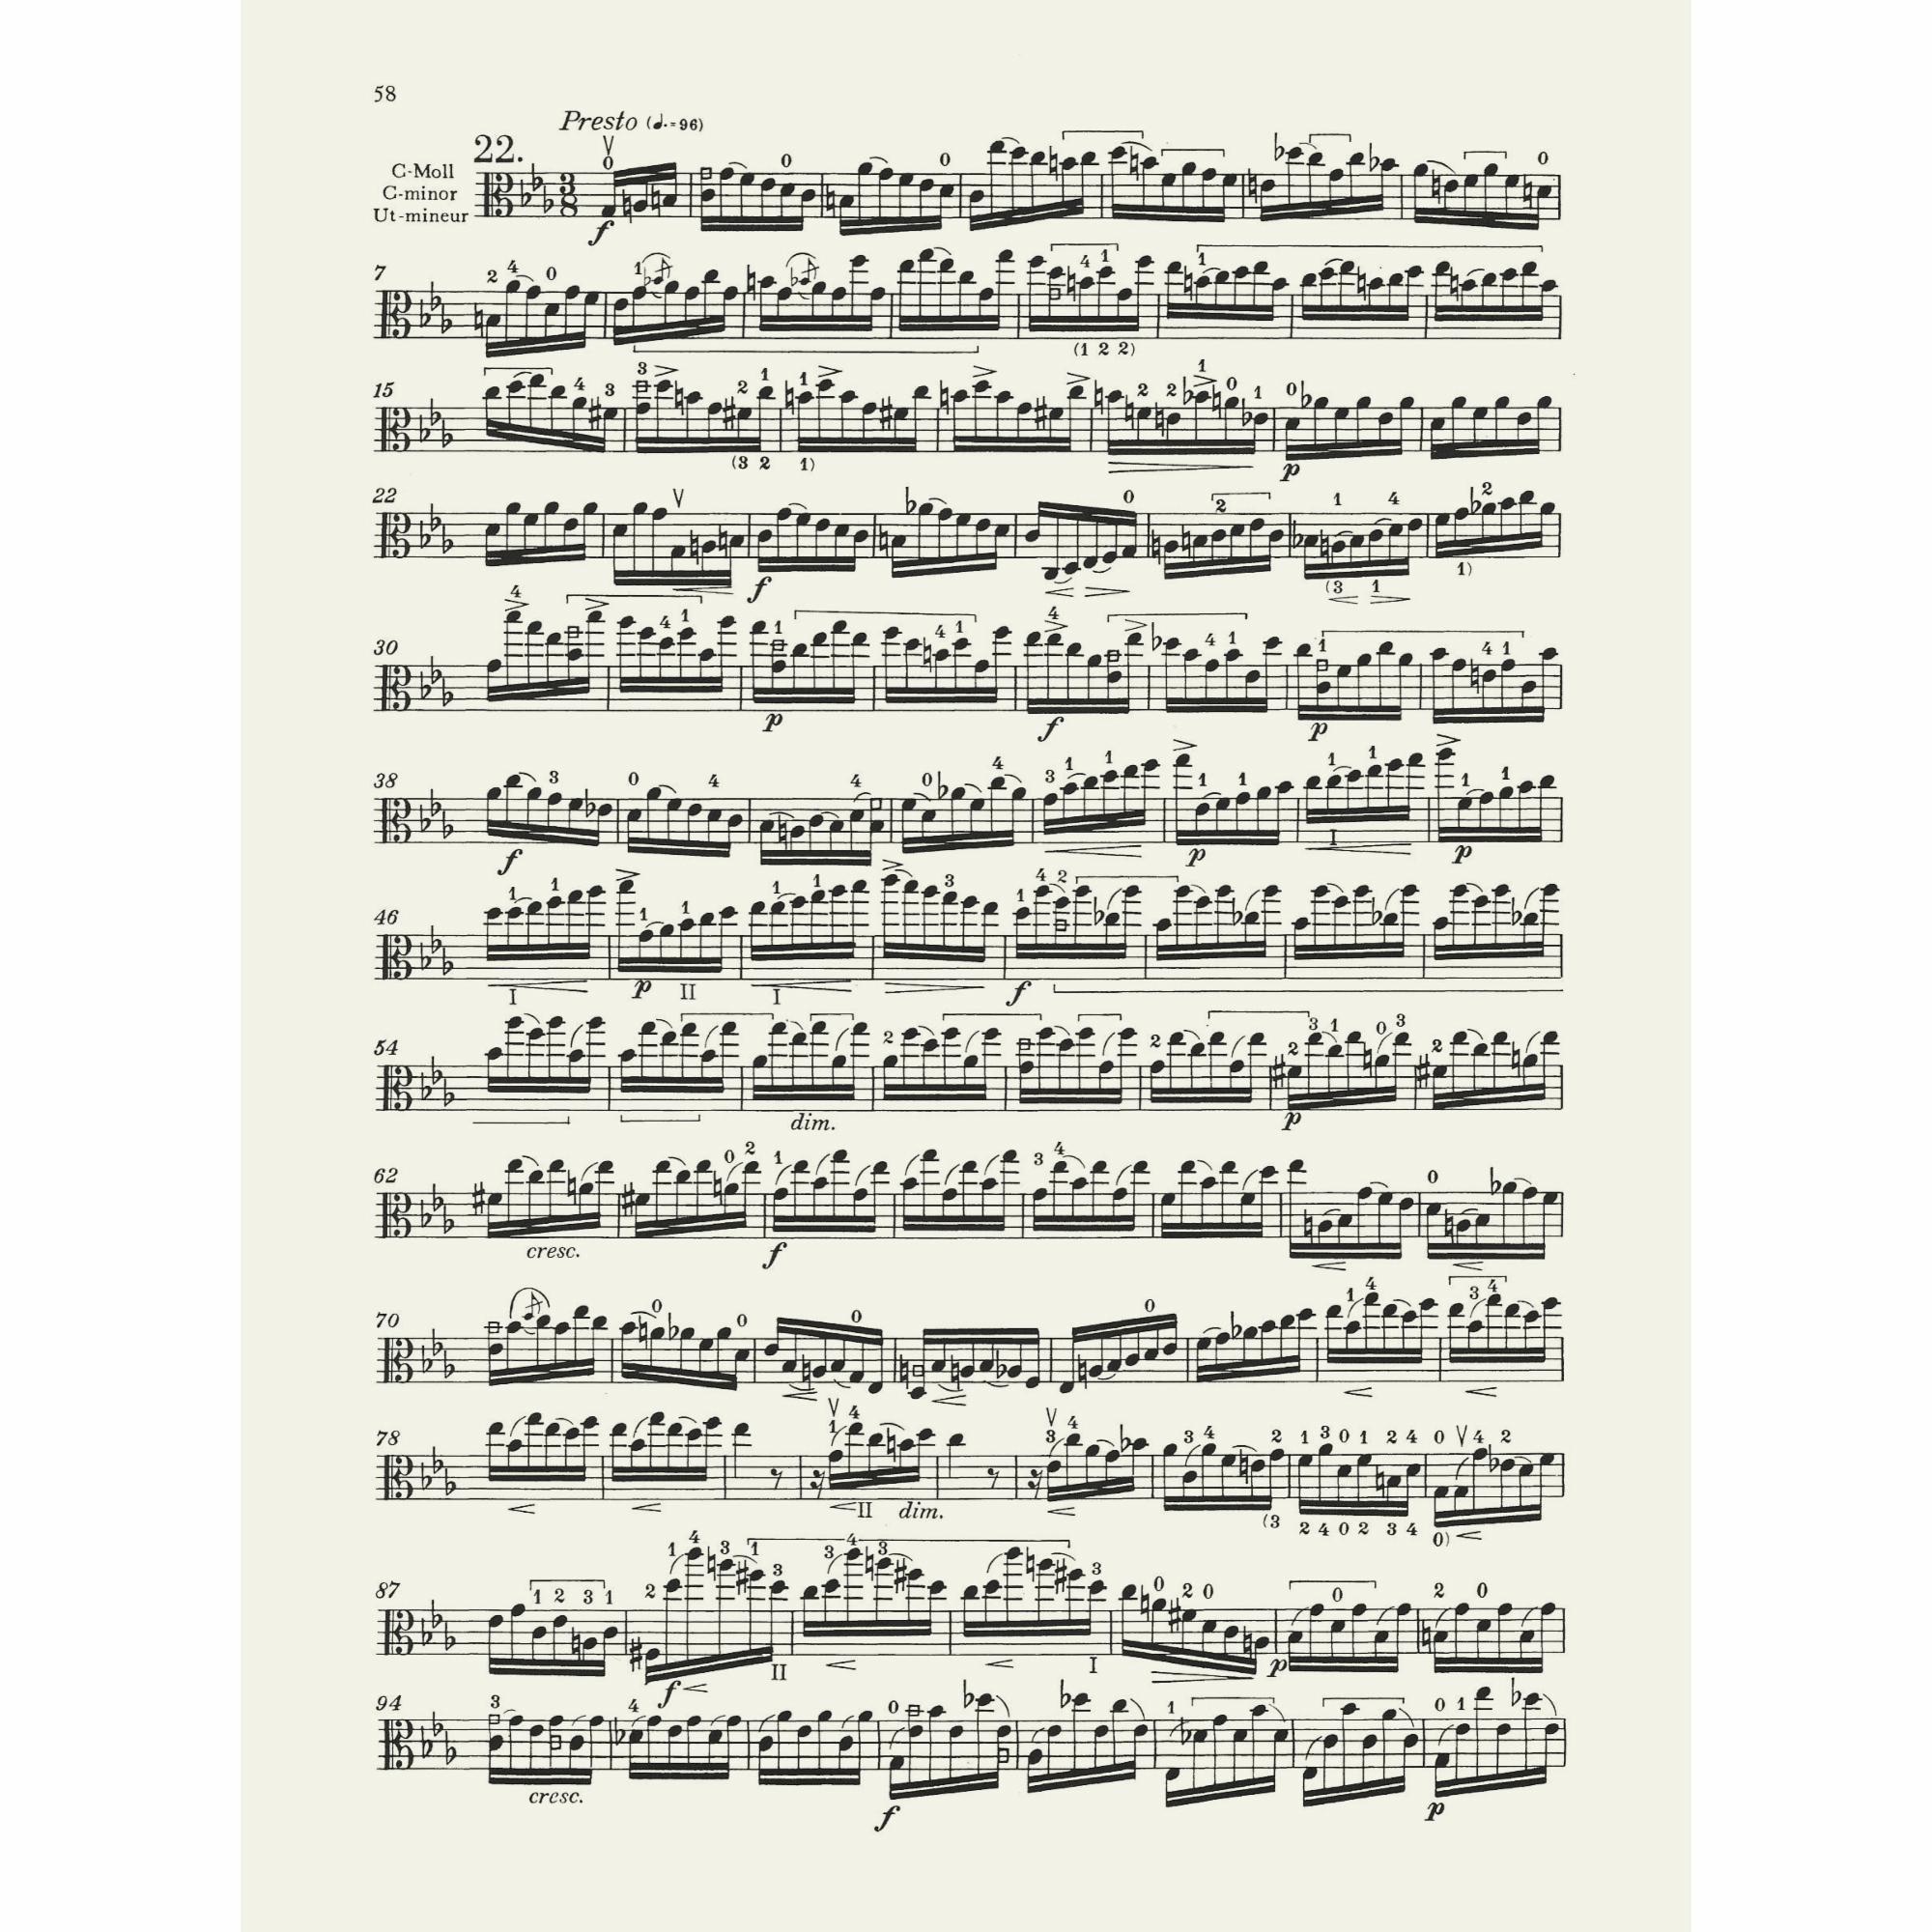 Rode: 24 Caprices for Violin